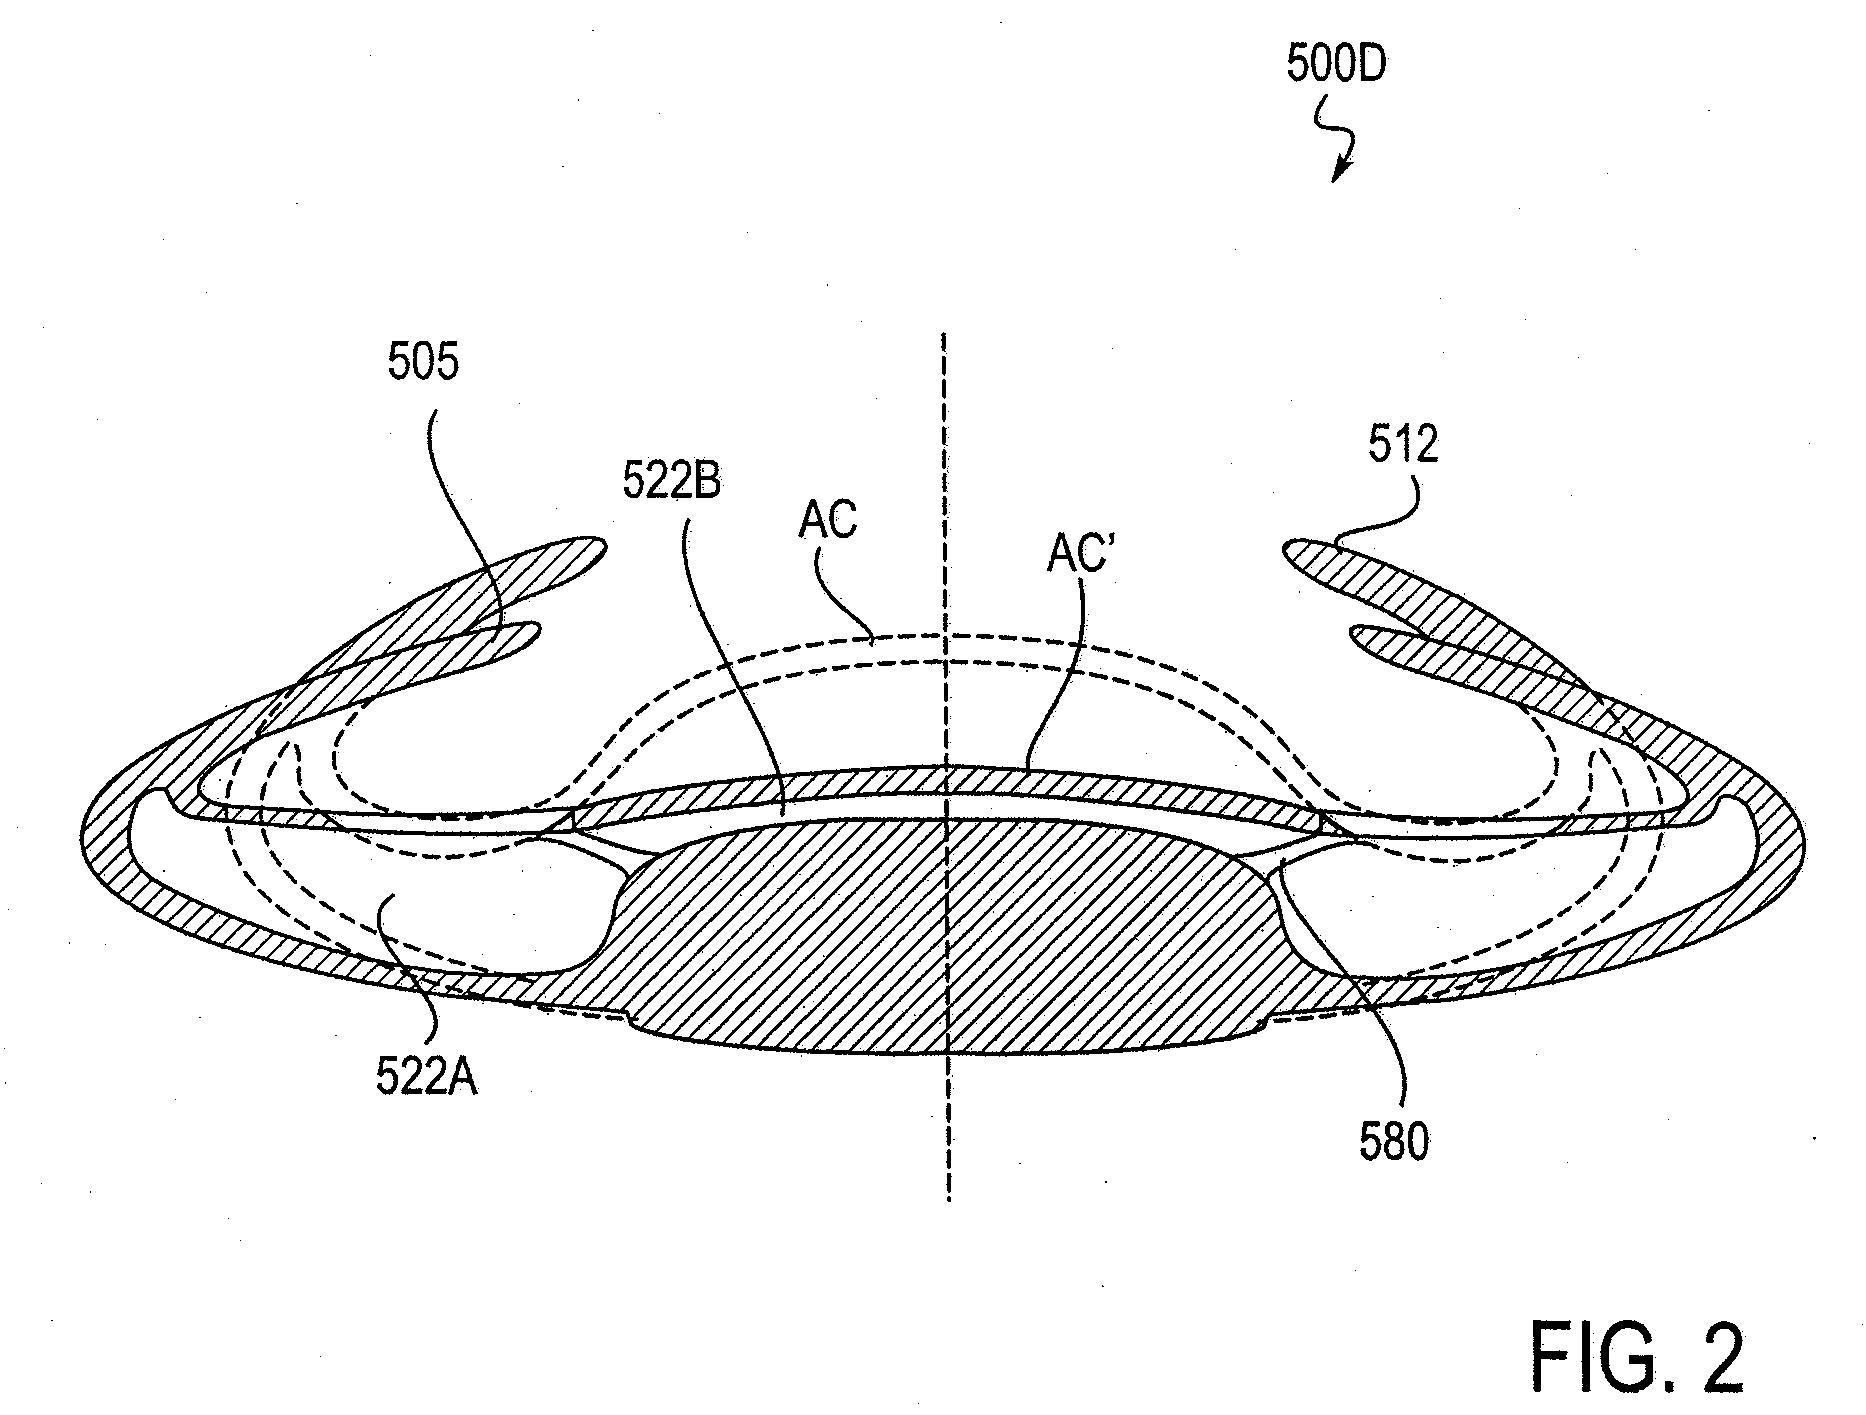 Post-Implant Accommodating Lens Modification